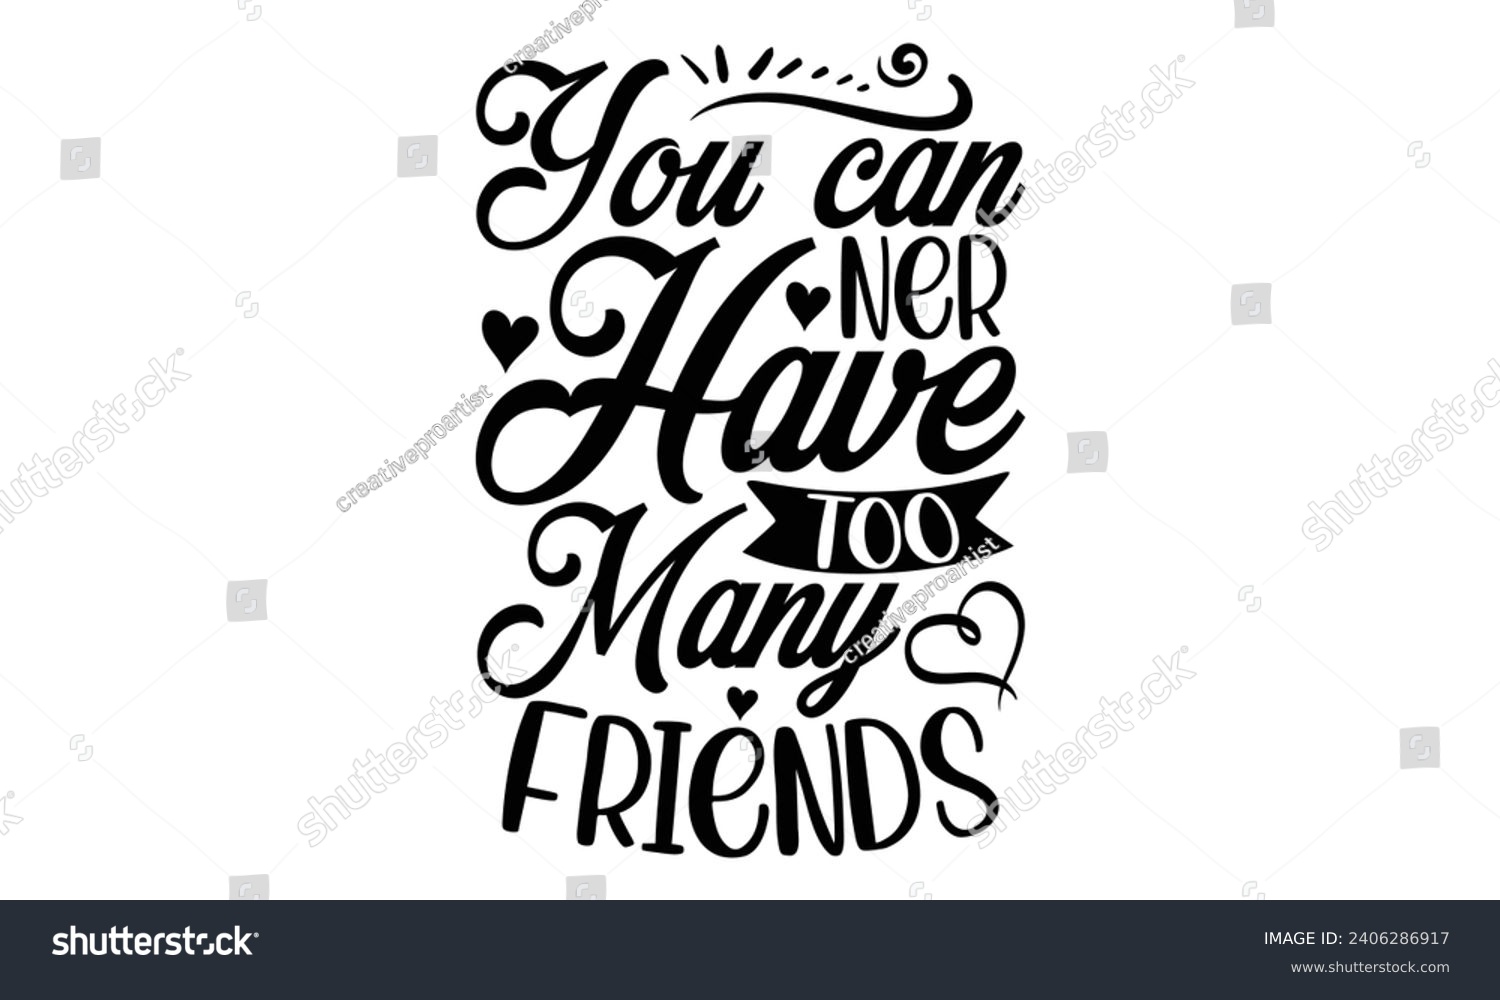 SVG of You Can Ner Have Too Many Friends- Best friends t- shirt design, Hand drawn vintage illustration with hand-lettering and decoration elements, greeting card template with typography text svg